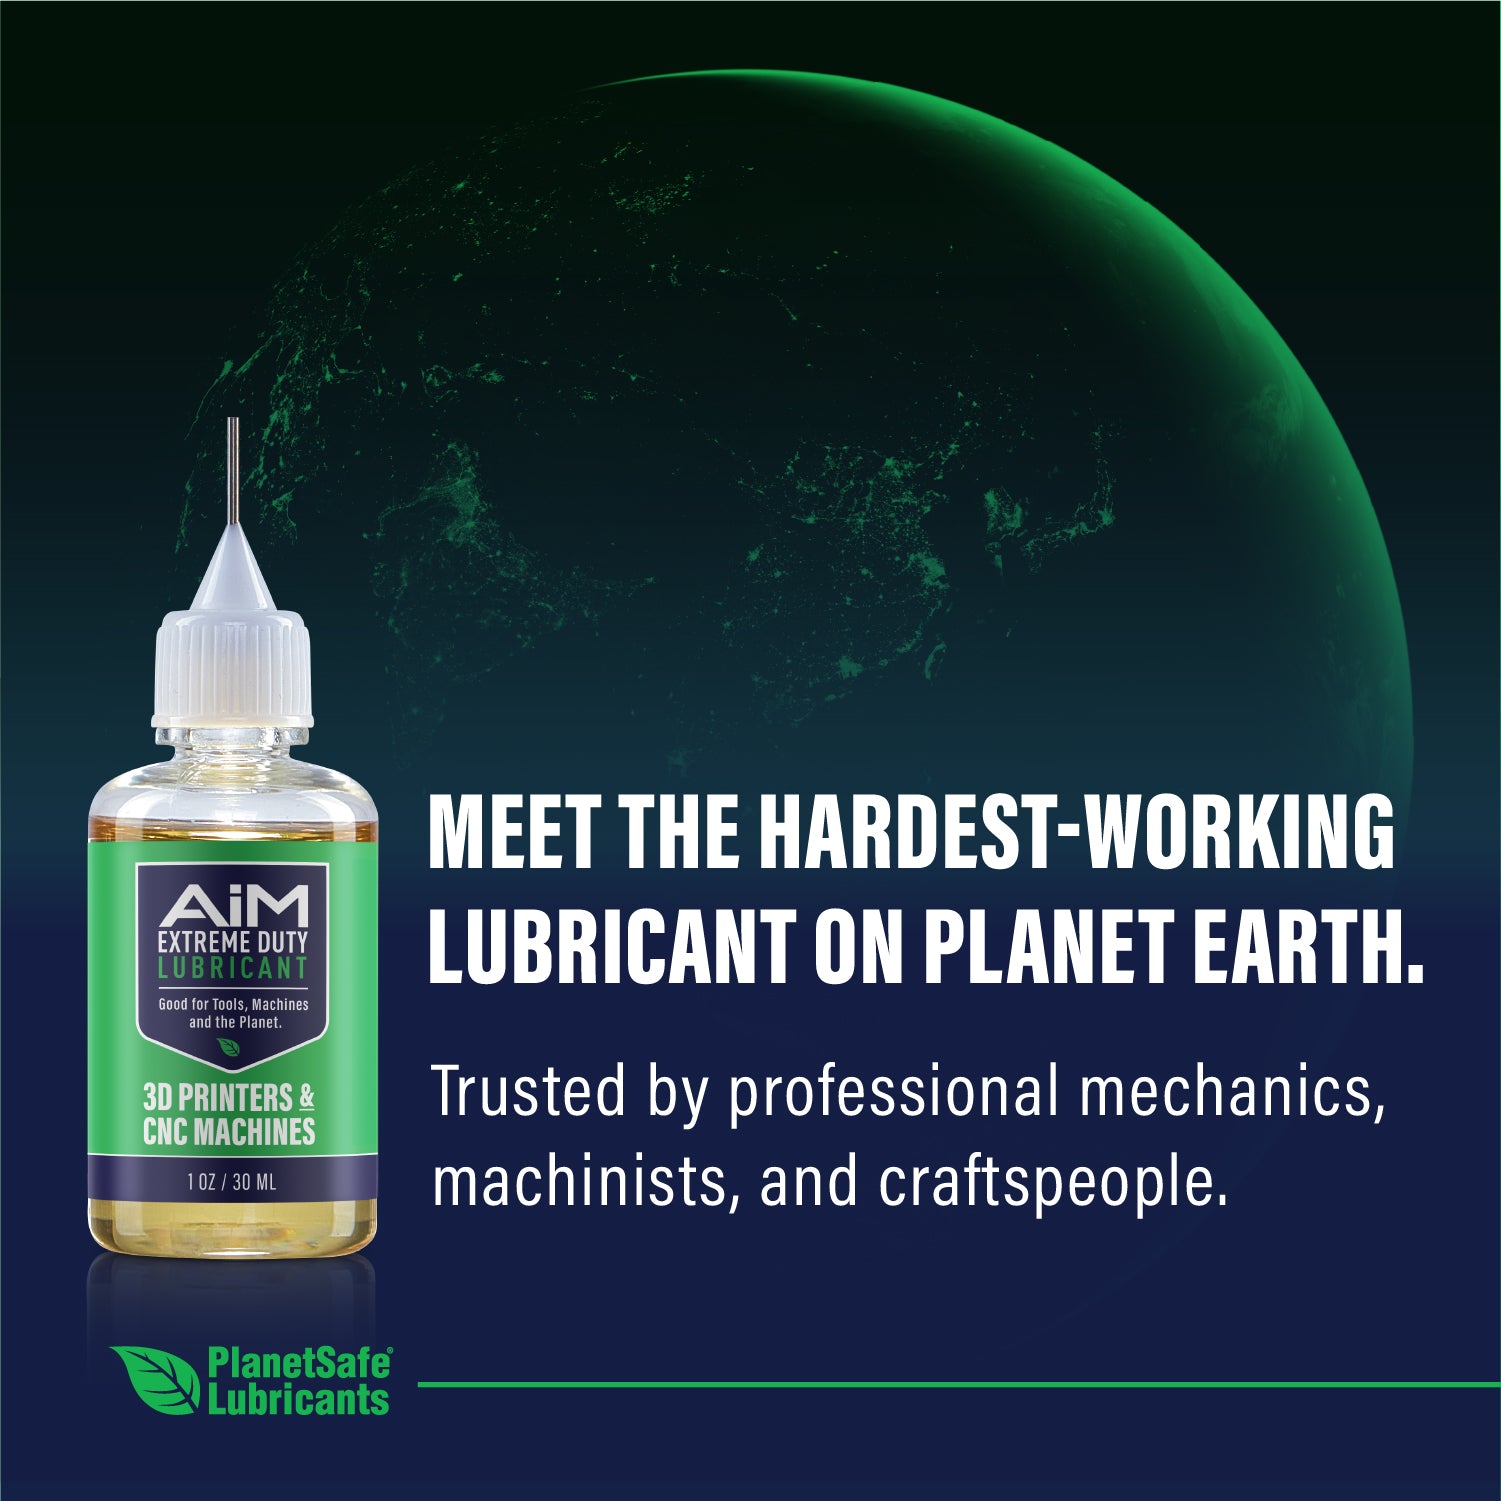 PlanetSafe AIM 3D Printer and CNC Machine Lubricant - Extreme Duty Lubricant, Non-Toxic, Odorless, 1oz - Scientifically Formulated Oil for 3D Printers and CNC Machines - Cleans, Penetrates, Protects- worlds best